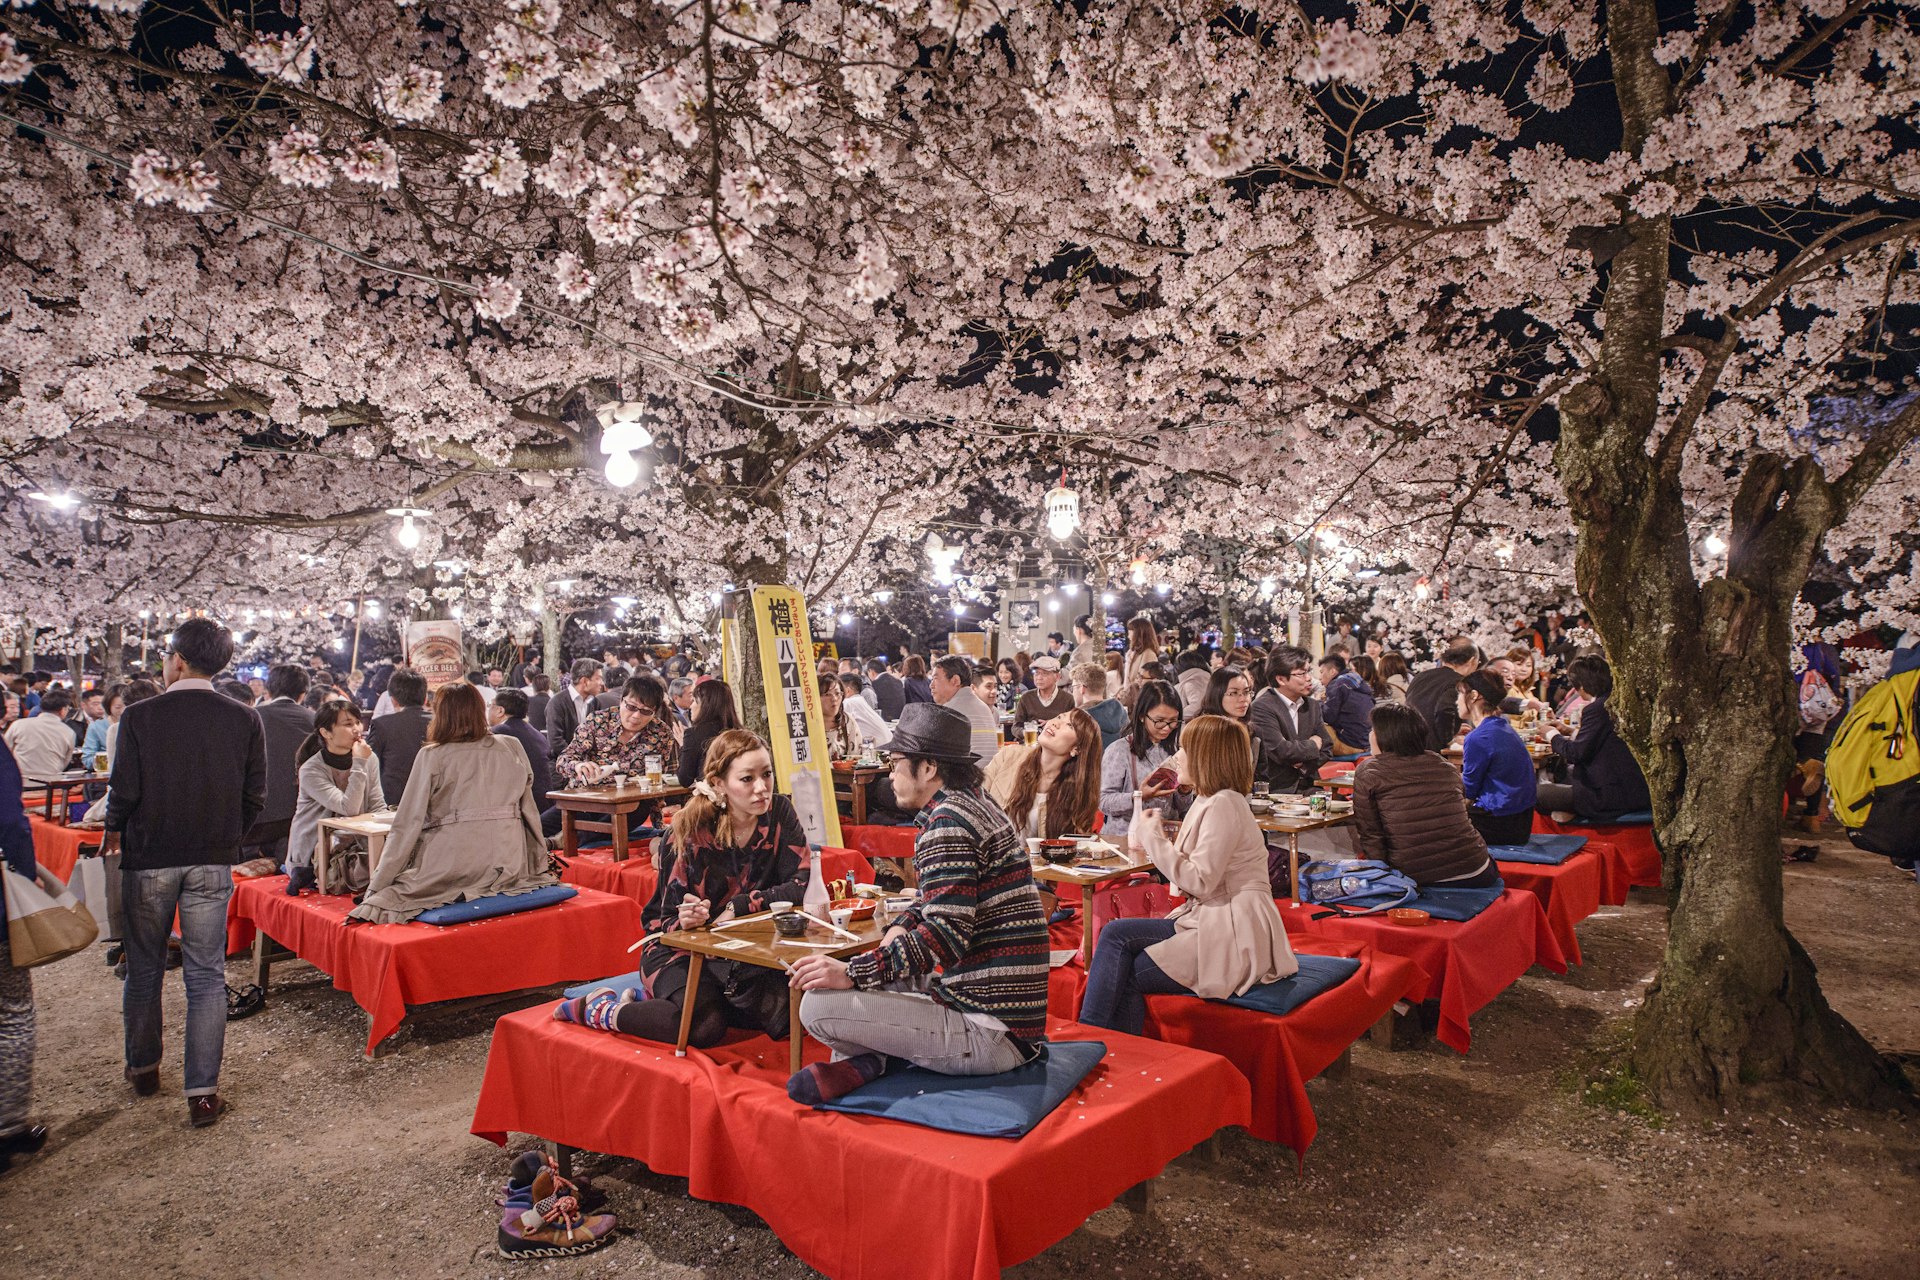 Crowds enjoy the spring cherry blossoms in Maruyama Park